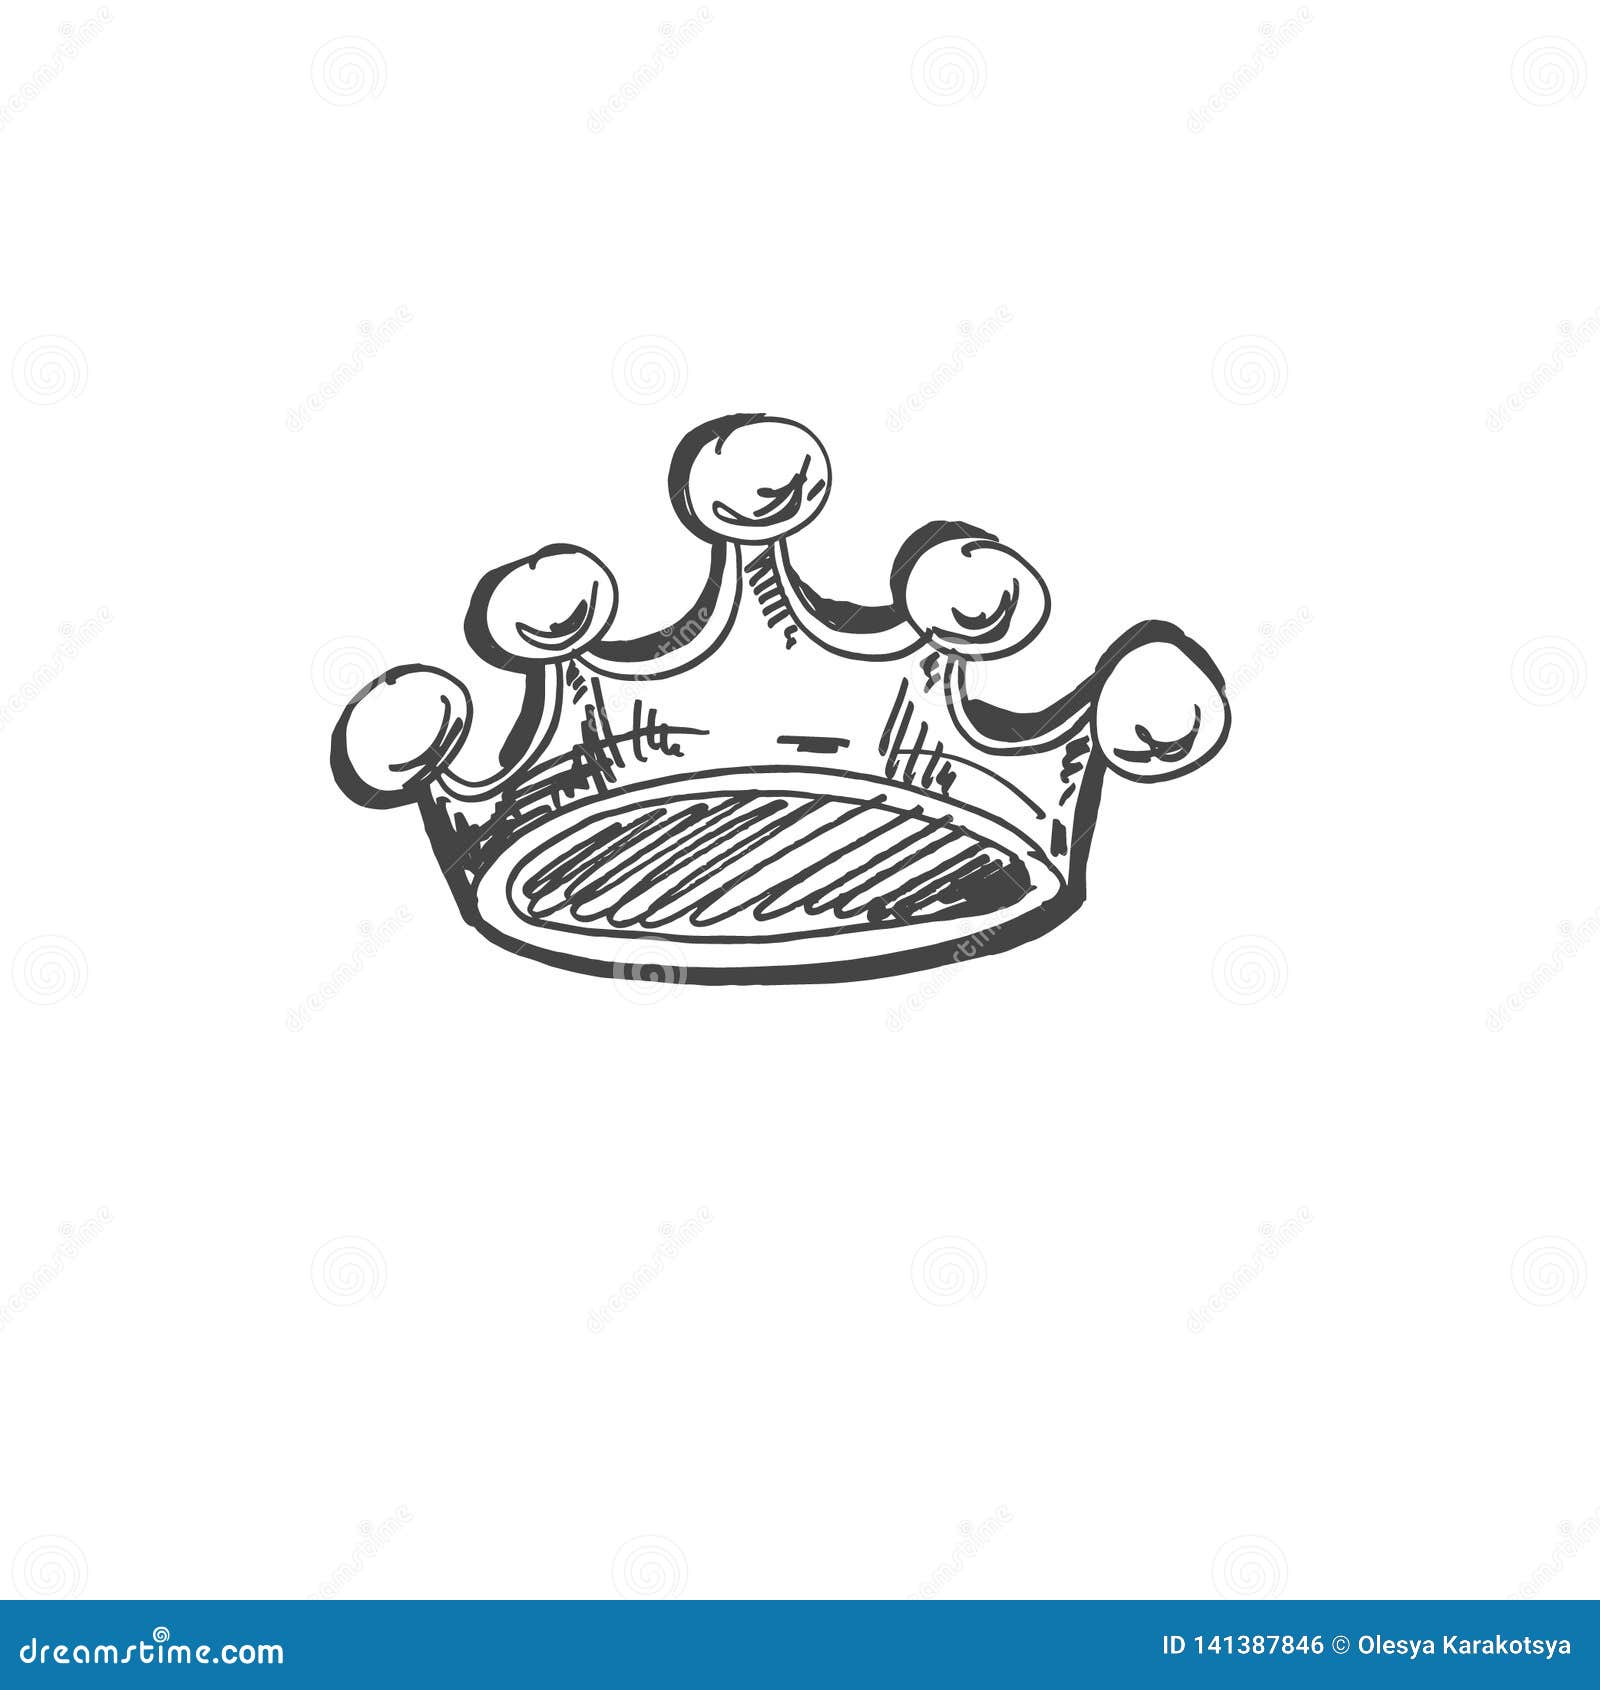 Sketch Doodle Drawing Icon Of Cartoon Crown Stock Vector - Illustration ...